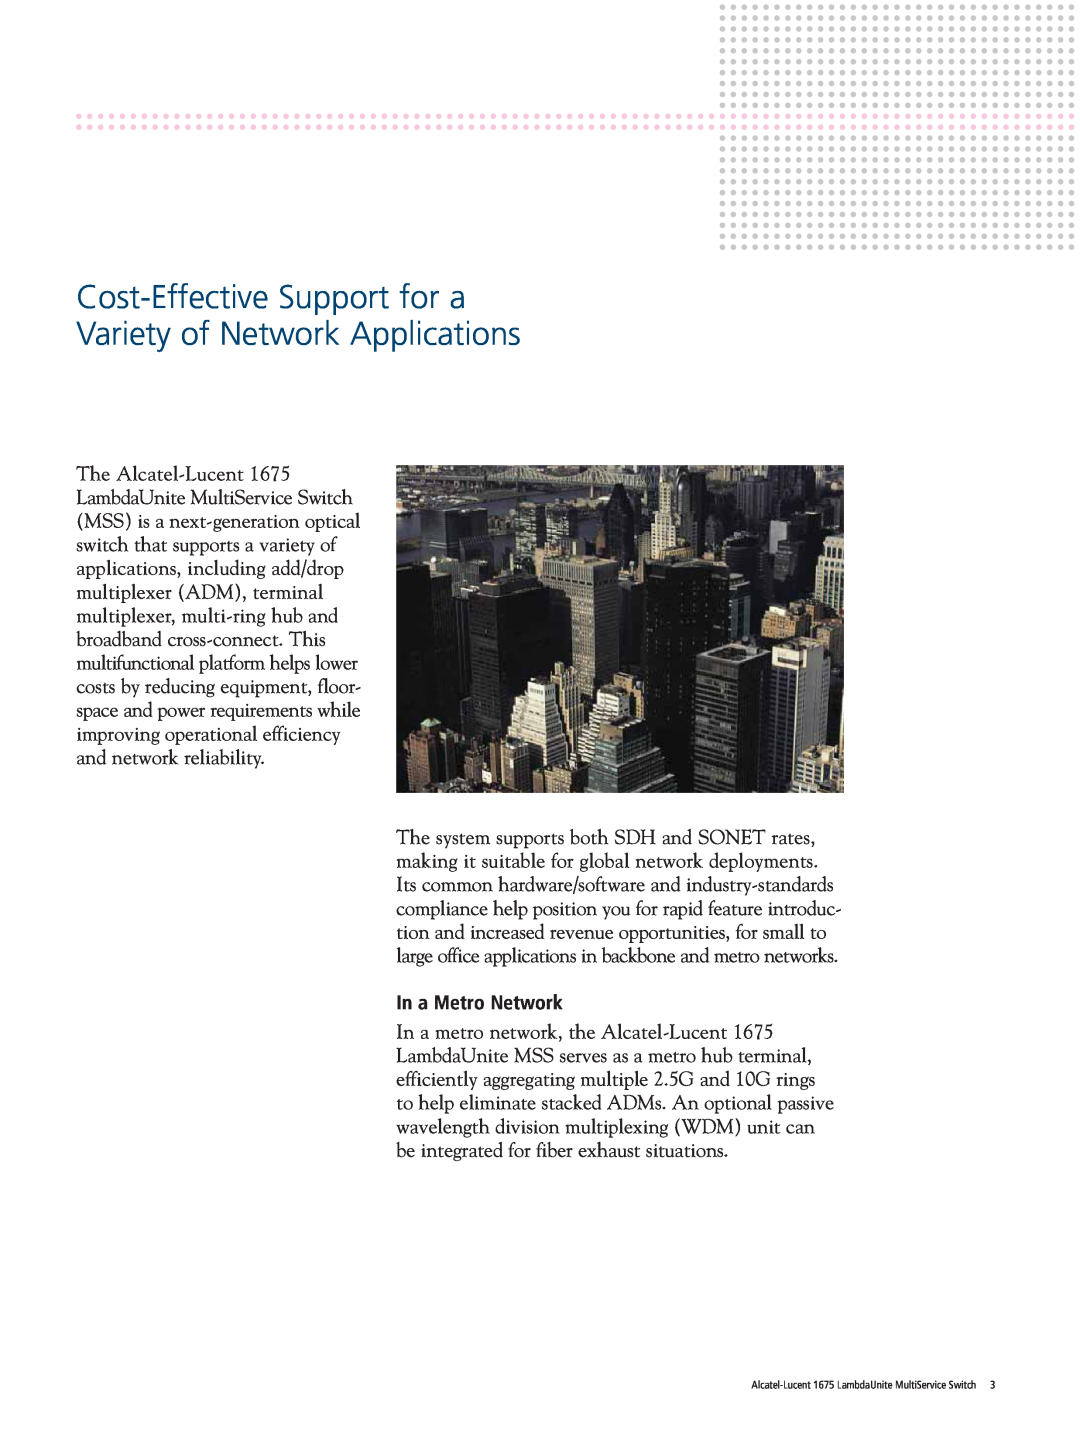 Alcatel-Lucent 1675 manual Cost-Effective Support for a Variety of Network Applications, In a Metro Network 